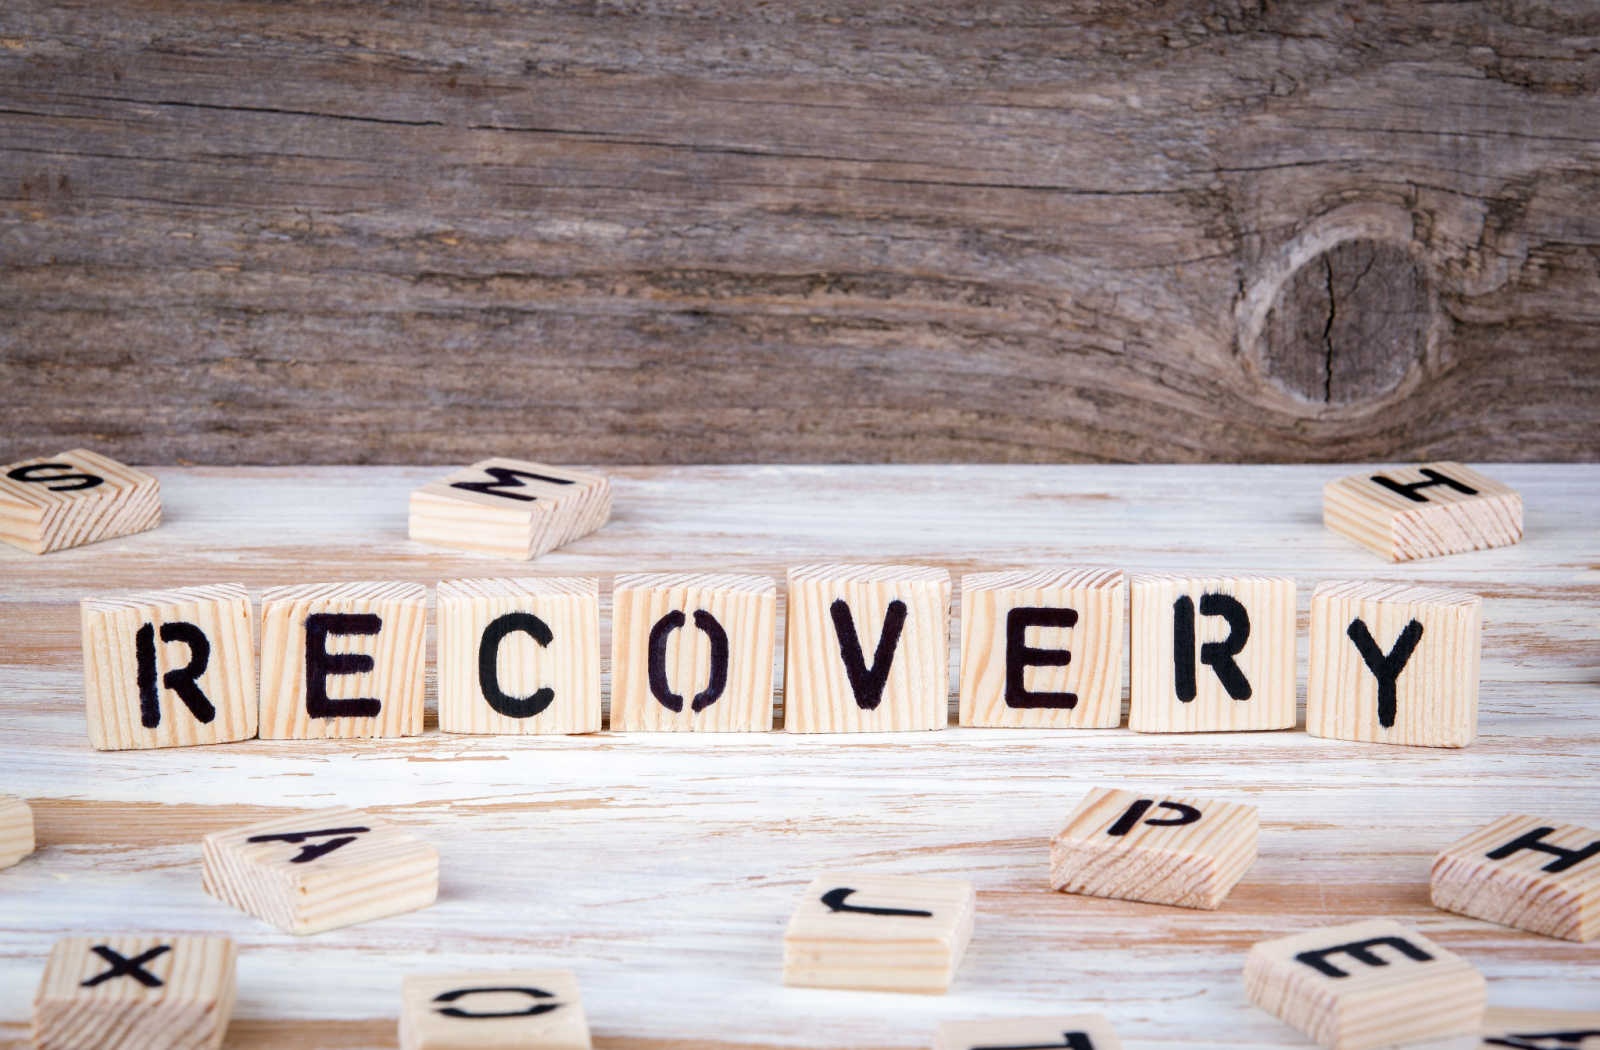 The word recovery written in wood letter blocks